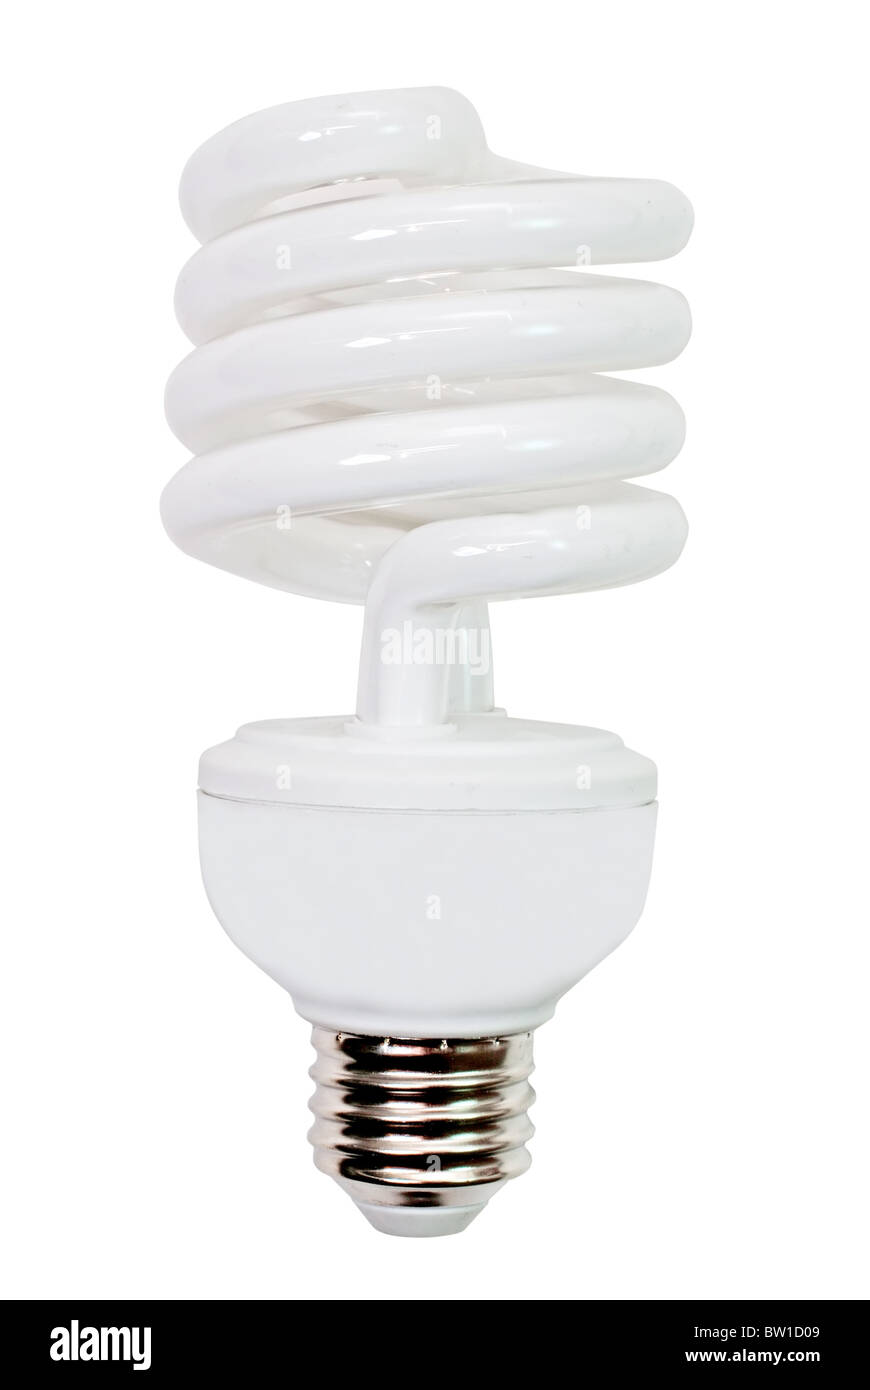 Compact fluorescent light bulb isolated on white background with clipping path. Stock Photo